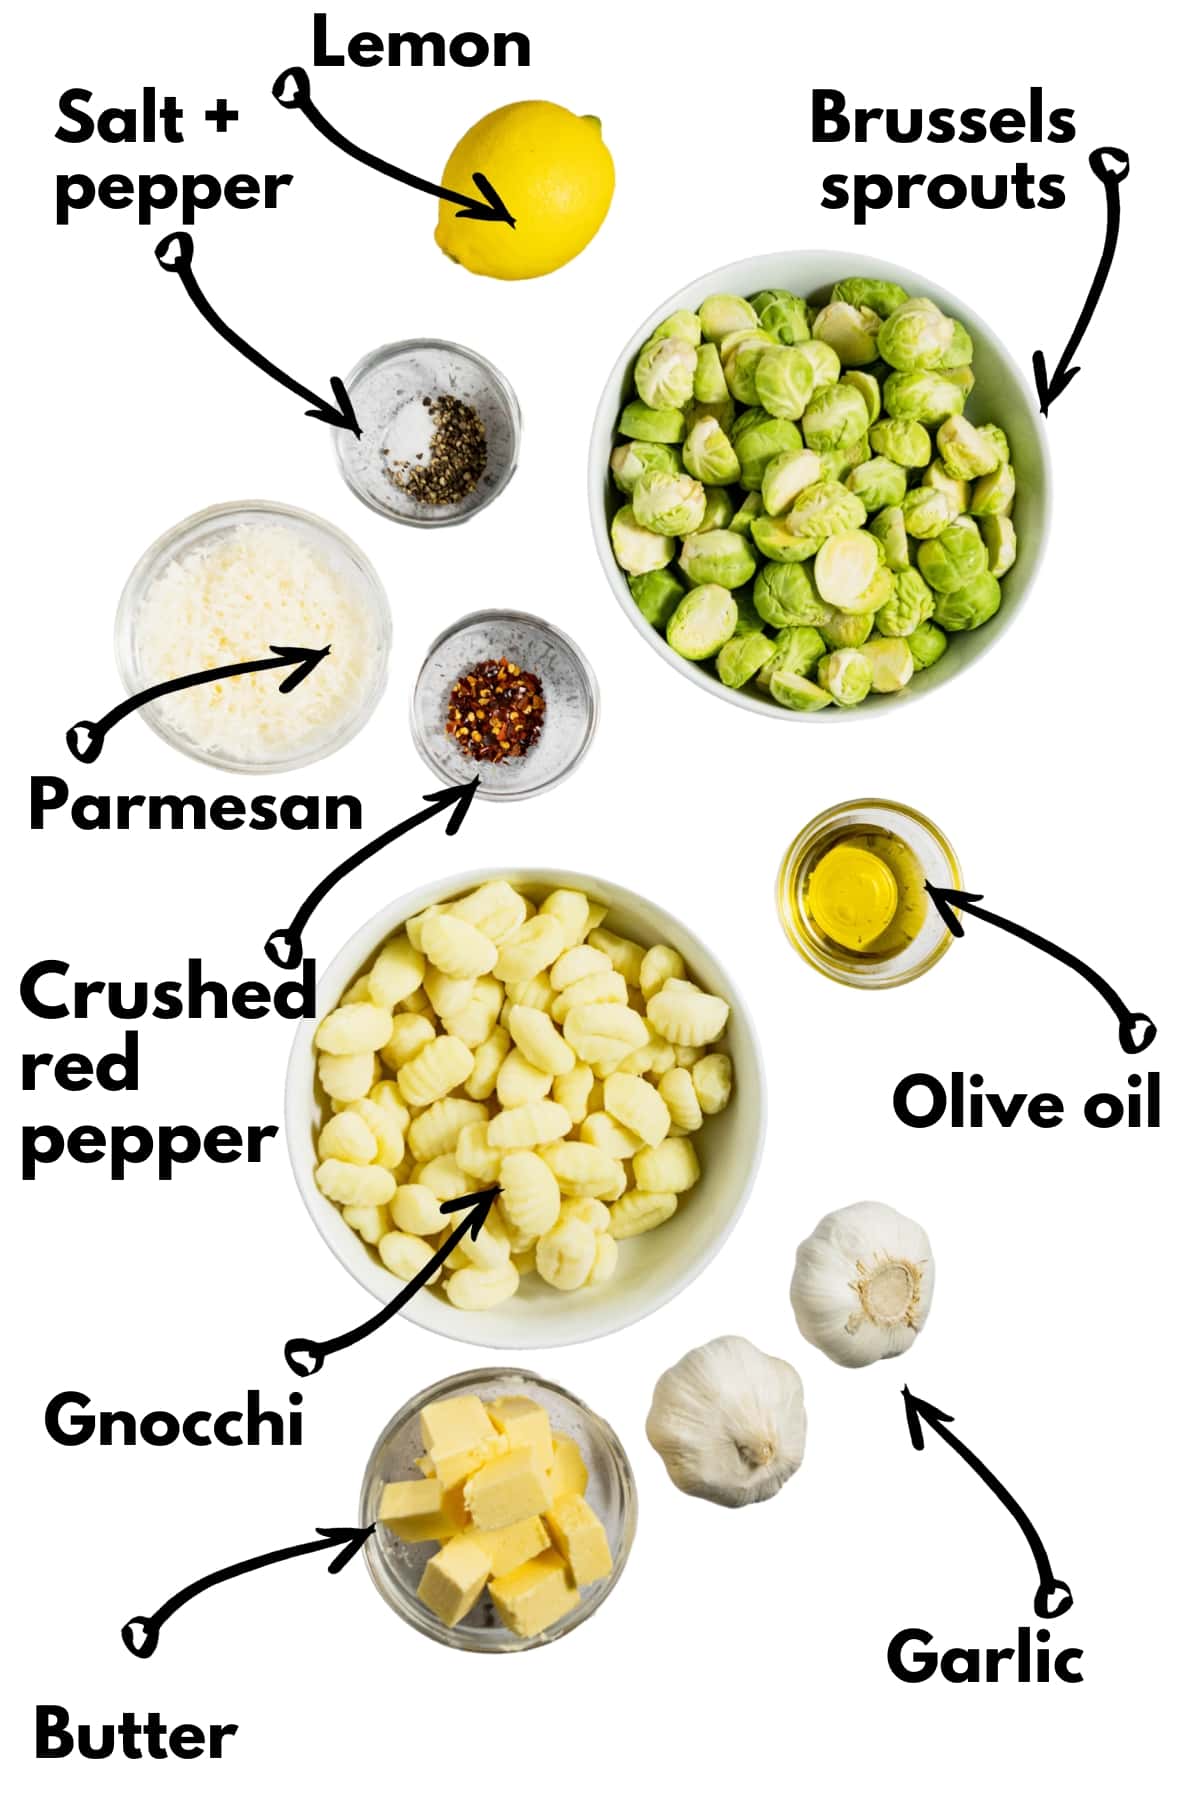 Gnocchi, brussels sprouts, oil, butter, garlic, salt, pepper, lemon, crushed red pepper, and parmesan on a white backdrop.